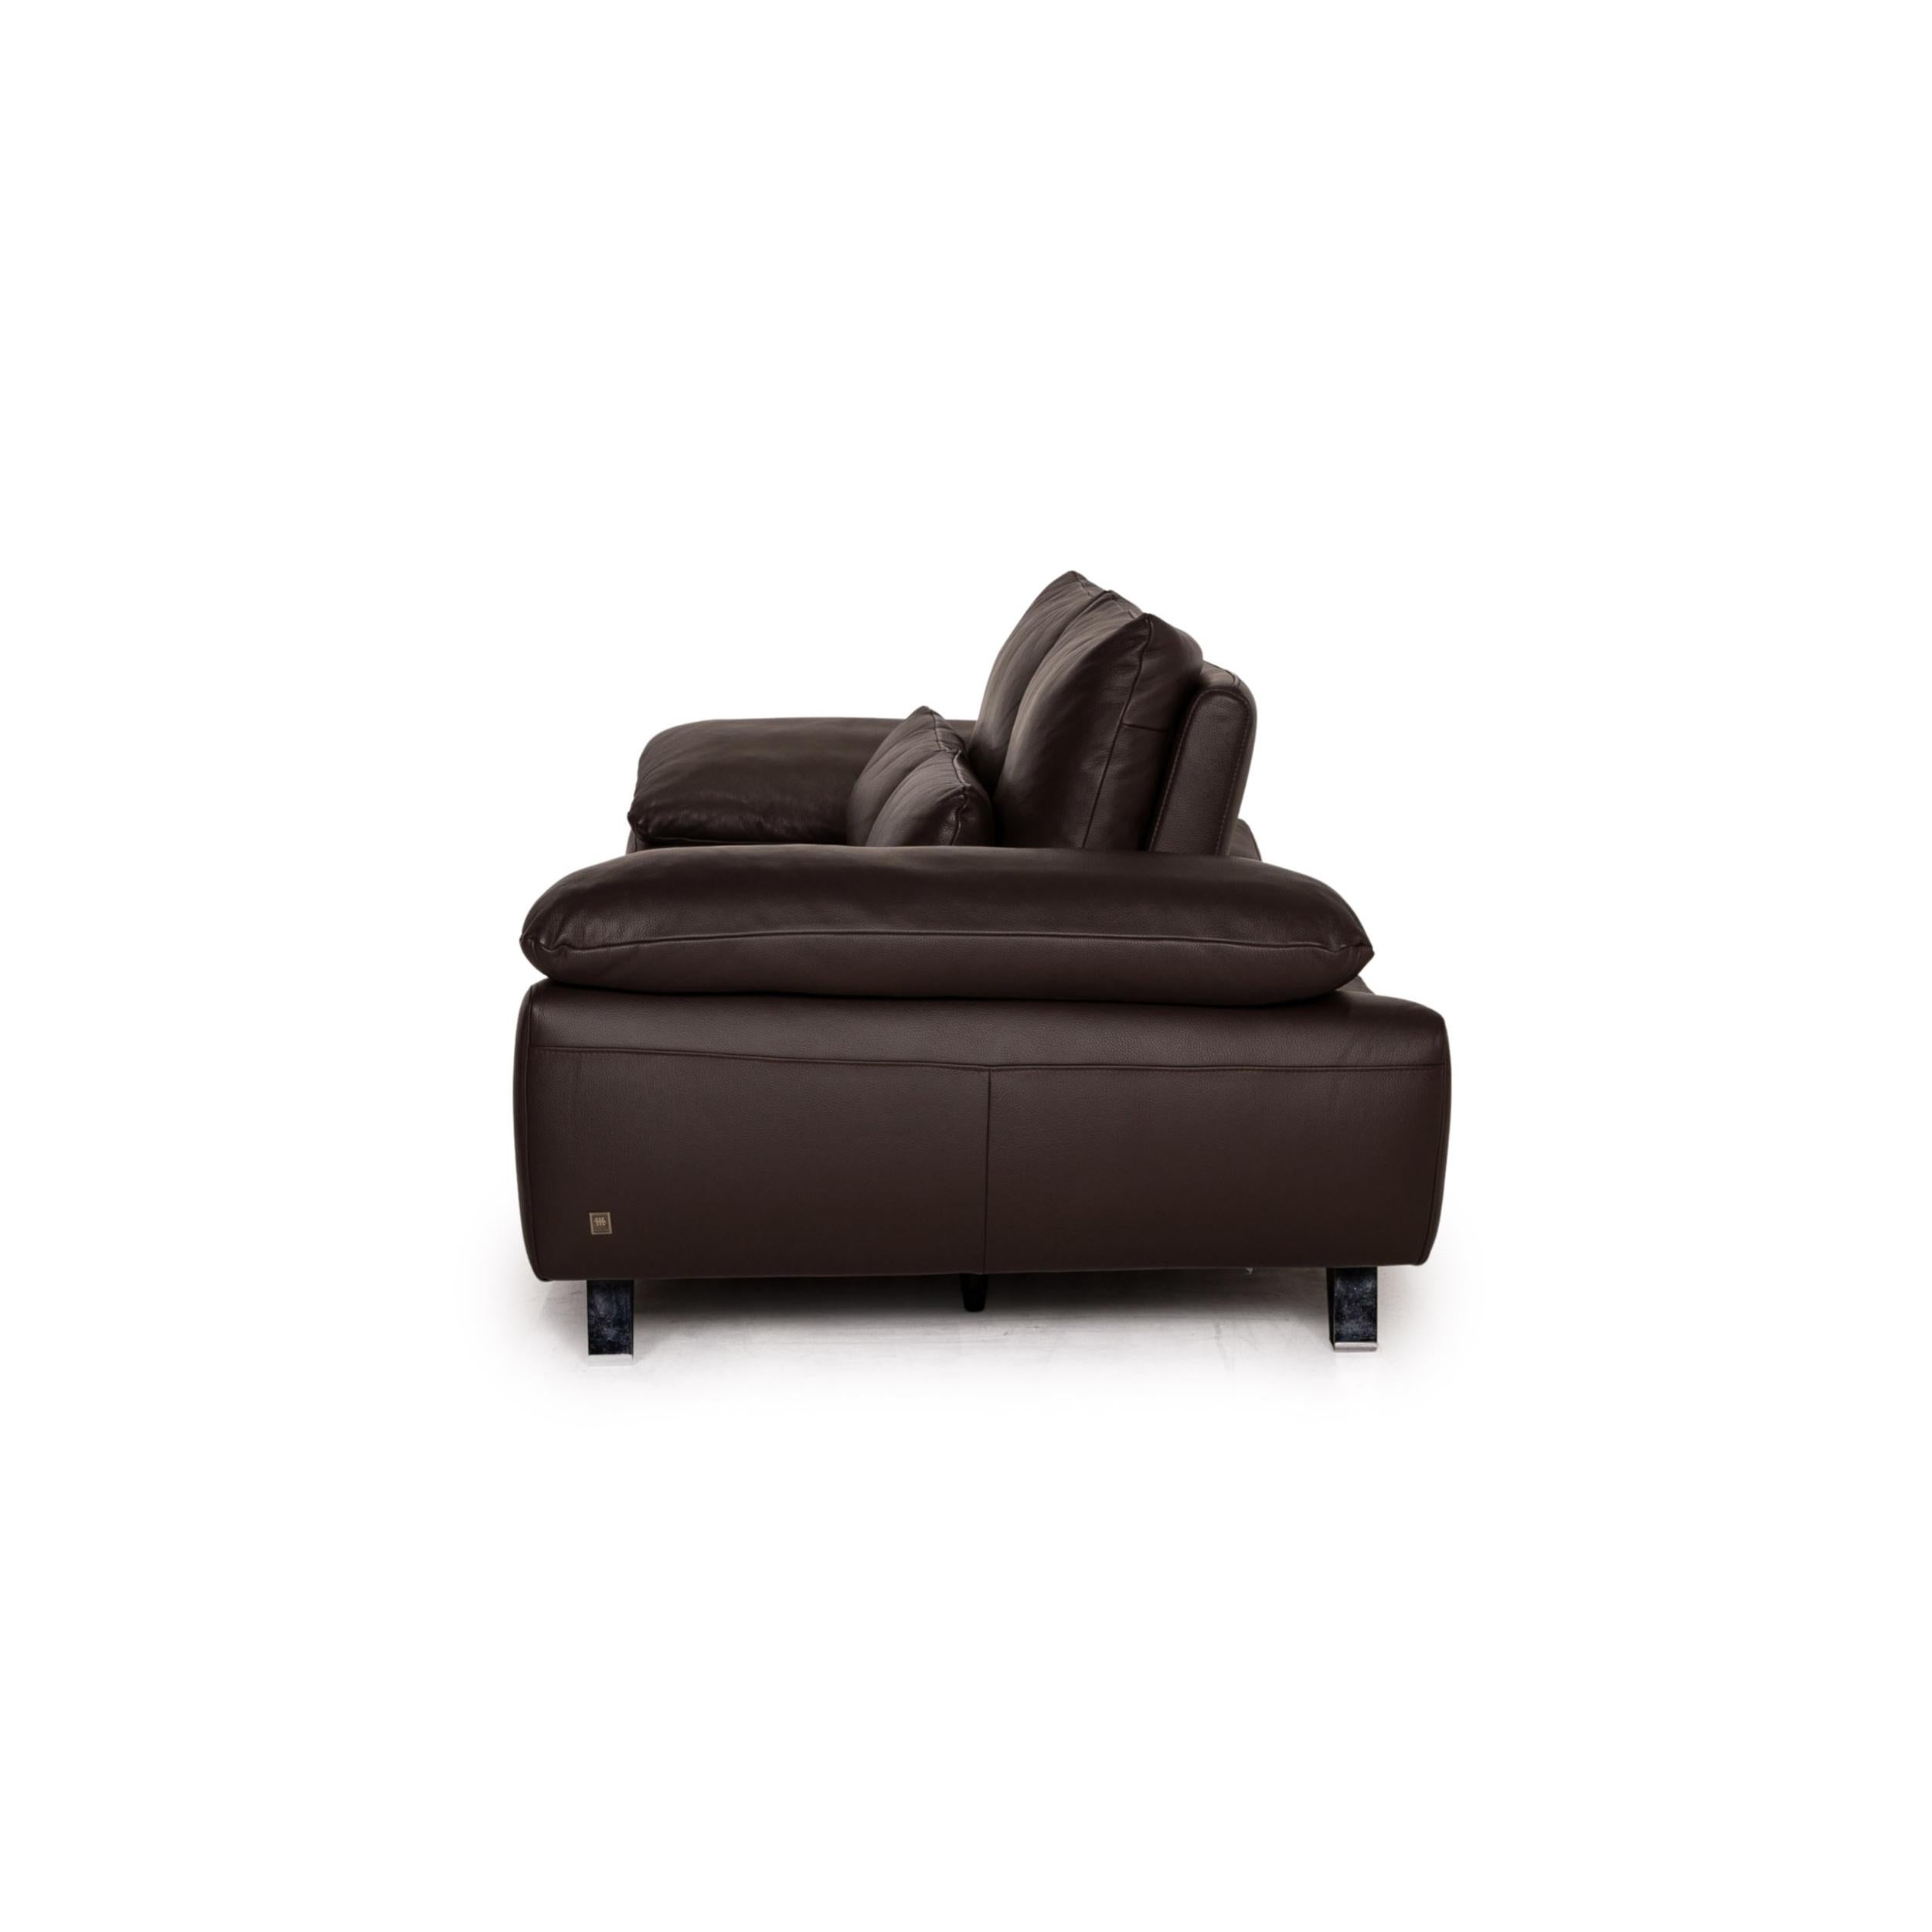 Musterring MR 680 Two-Seater Sofa Brown Leather Couch Function 6